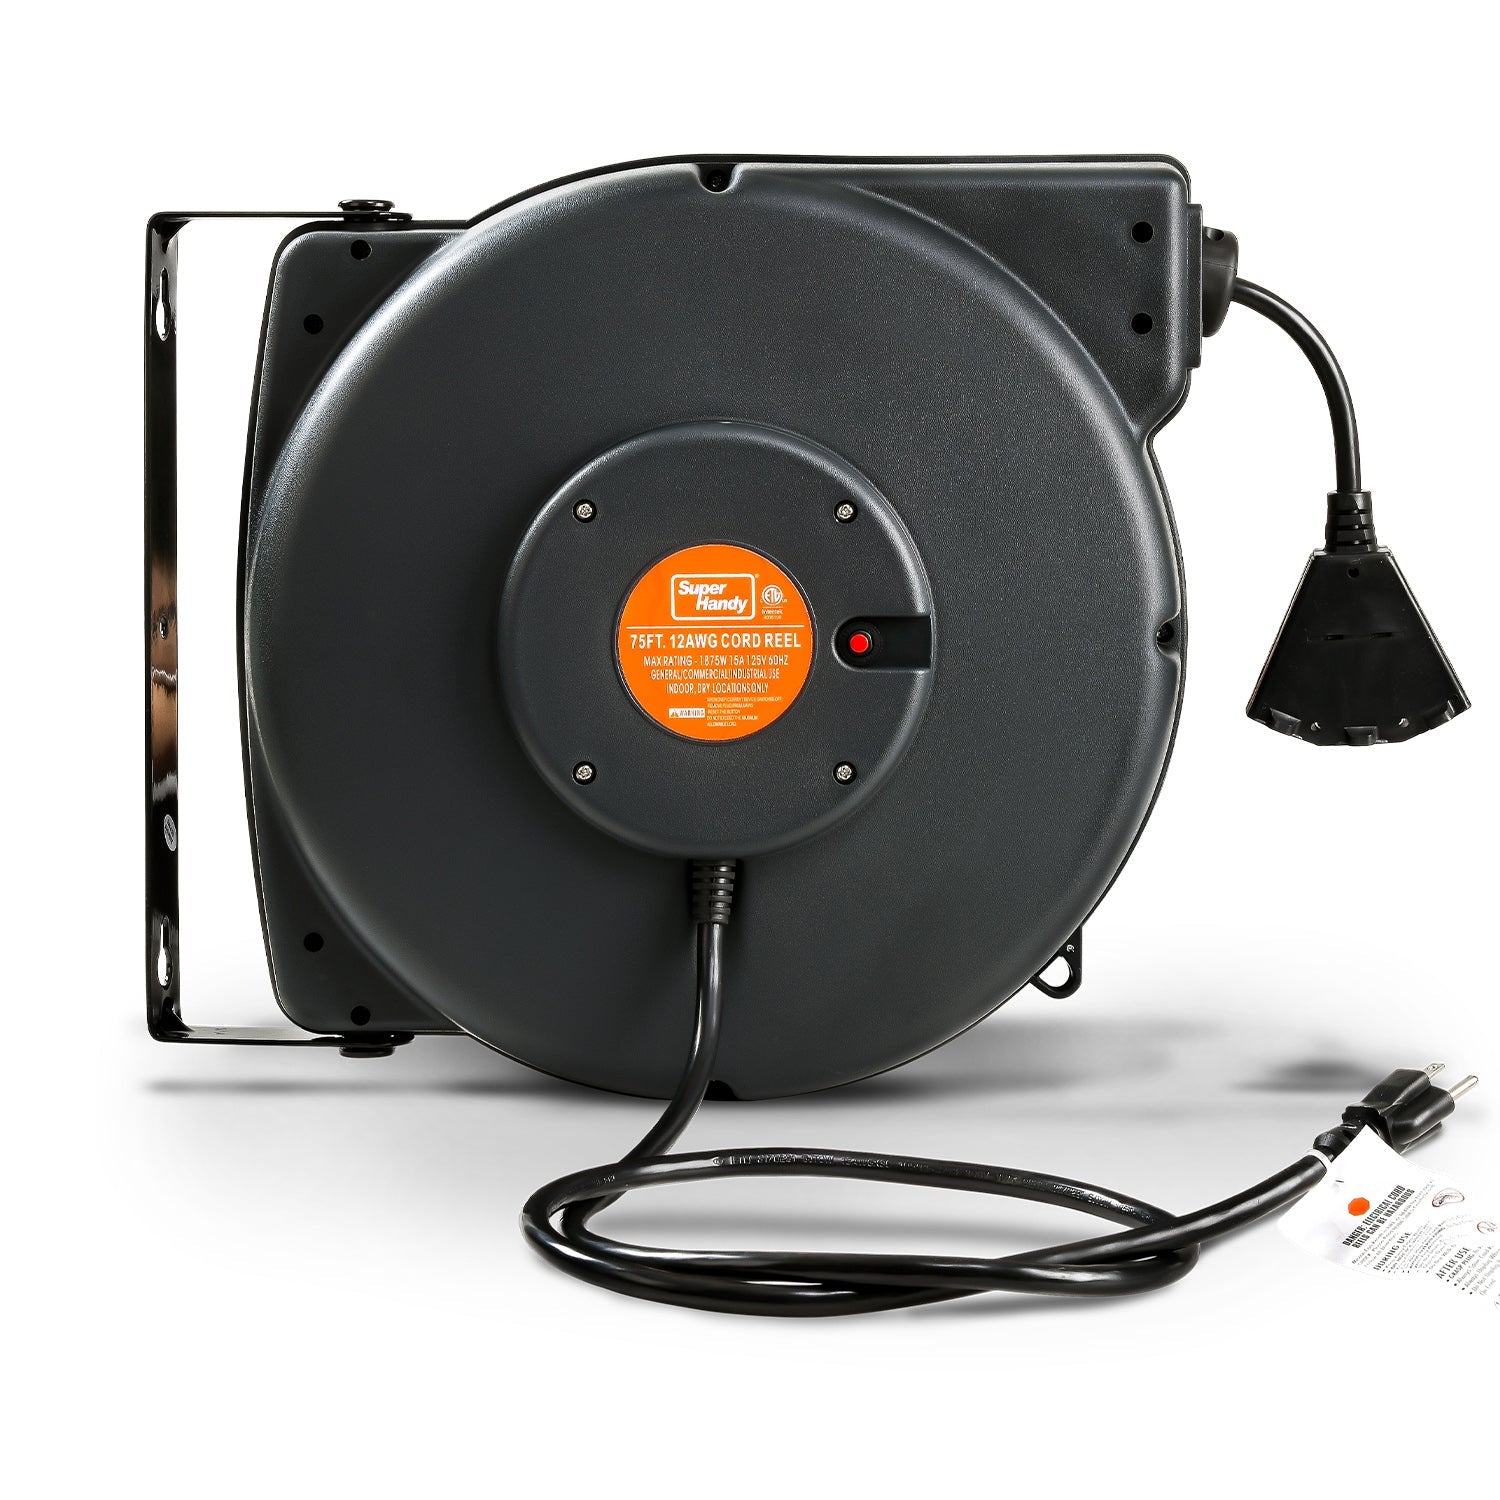 SuperHandy Enclosed Extension Cord Reel - 12AWG, 75' Ft Cord Length